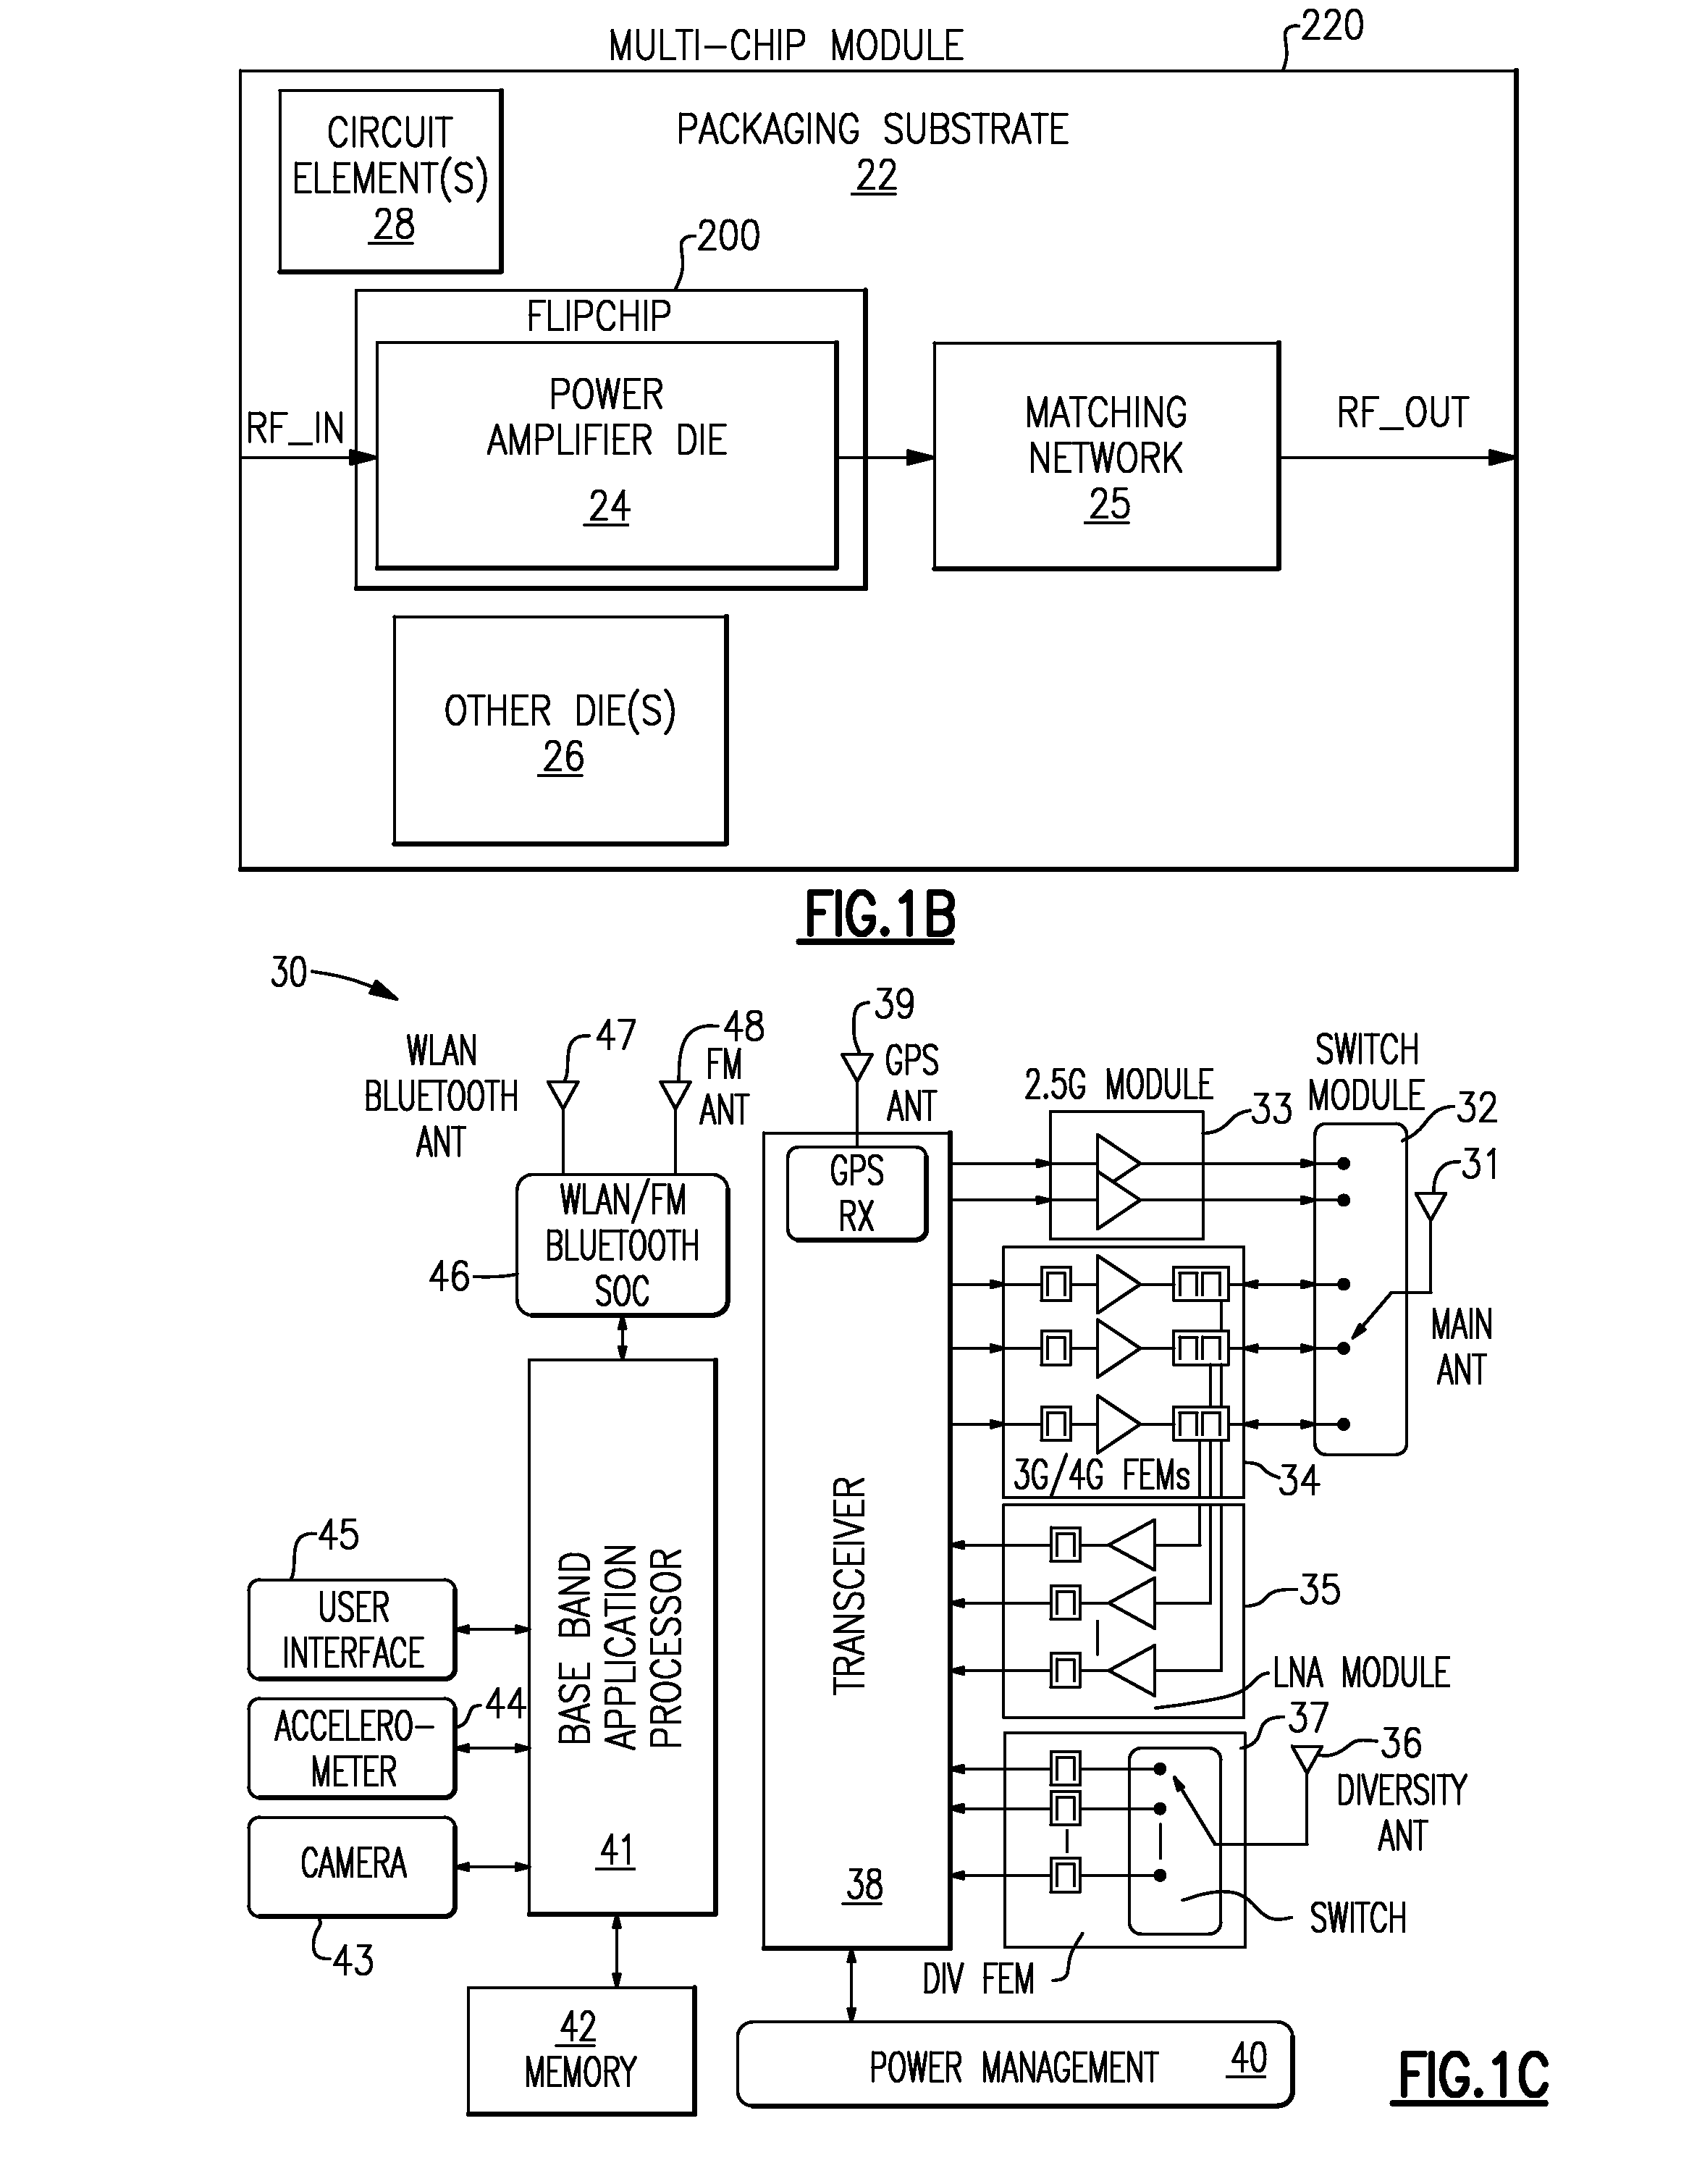 Flip-chip linear power amplifier with high power added efficiency